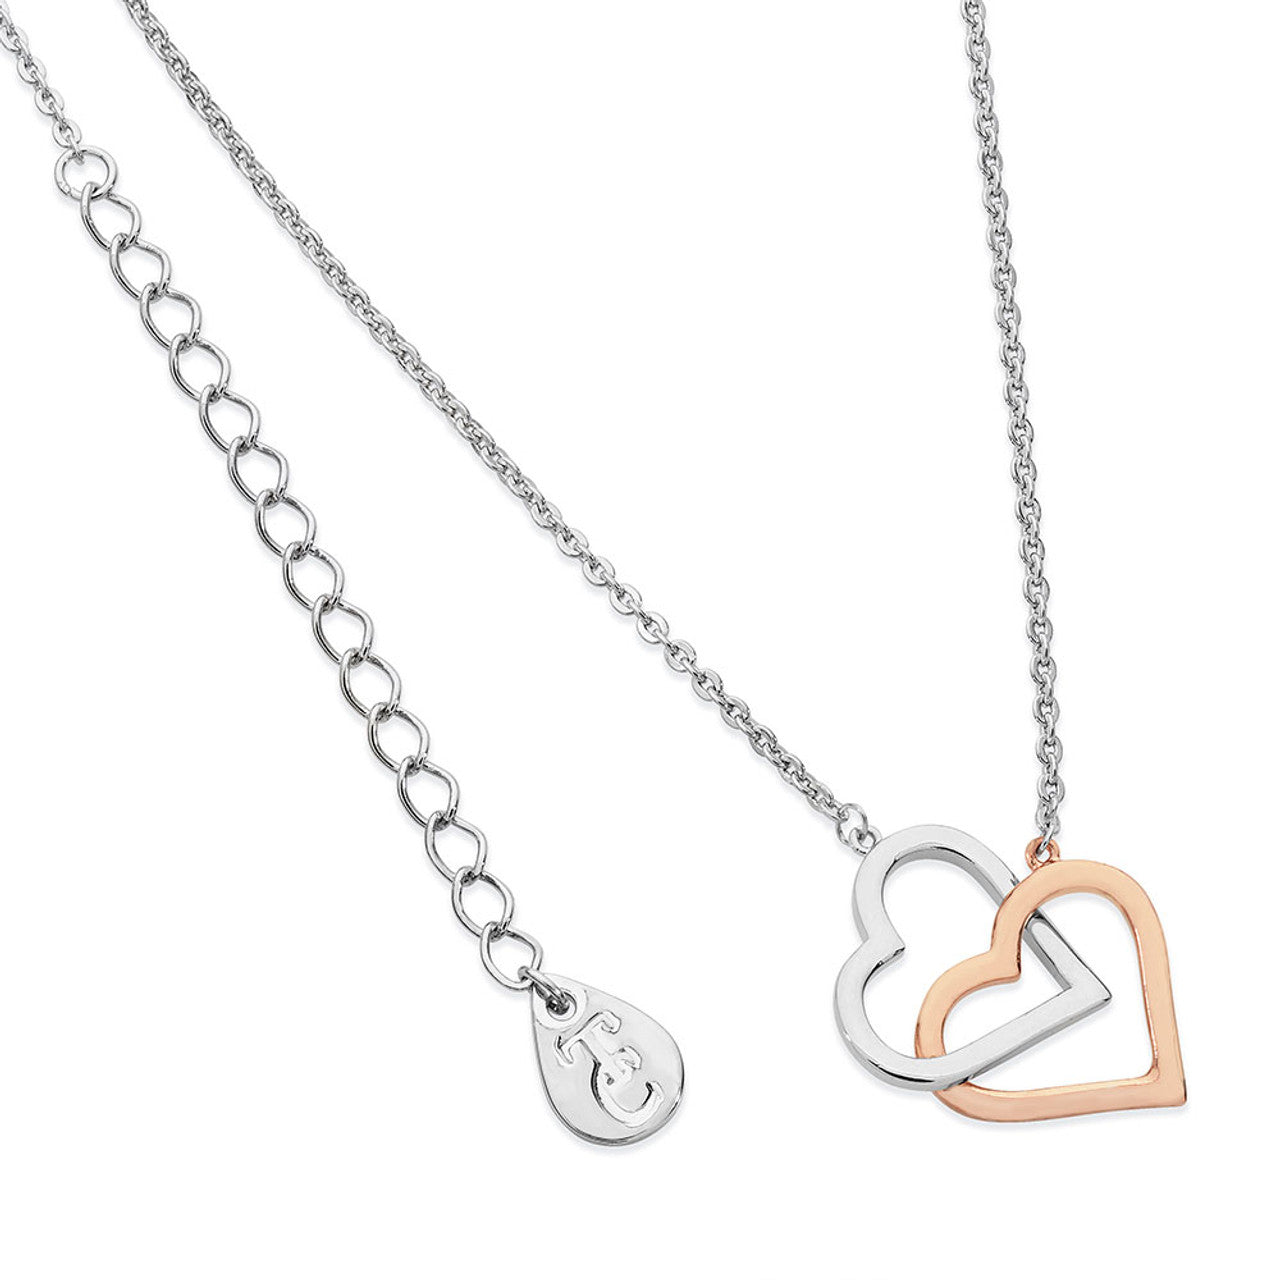 Tipperary Crystal Pendant - Heart Collection - Interlinked 2 Tone Heart